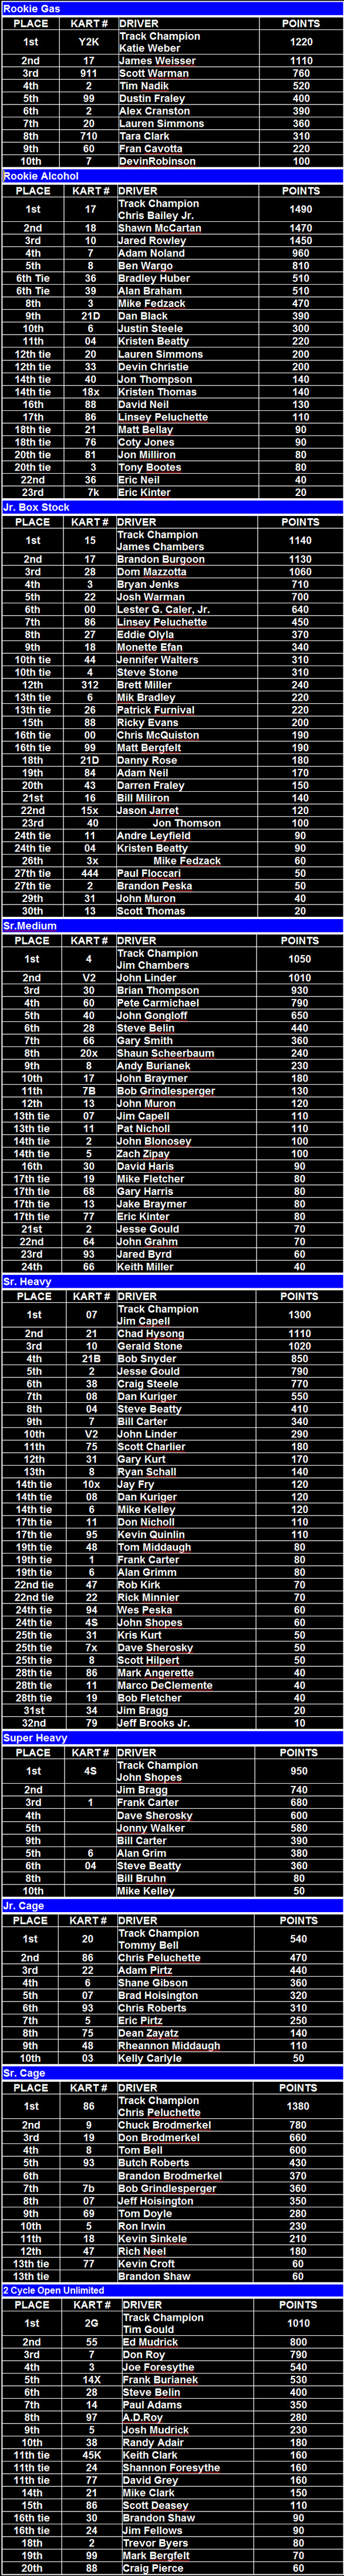 Naugle Speedway 2000 Final Point Standings